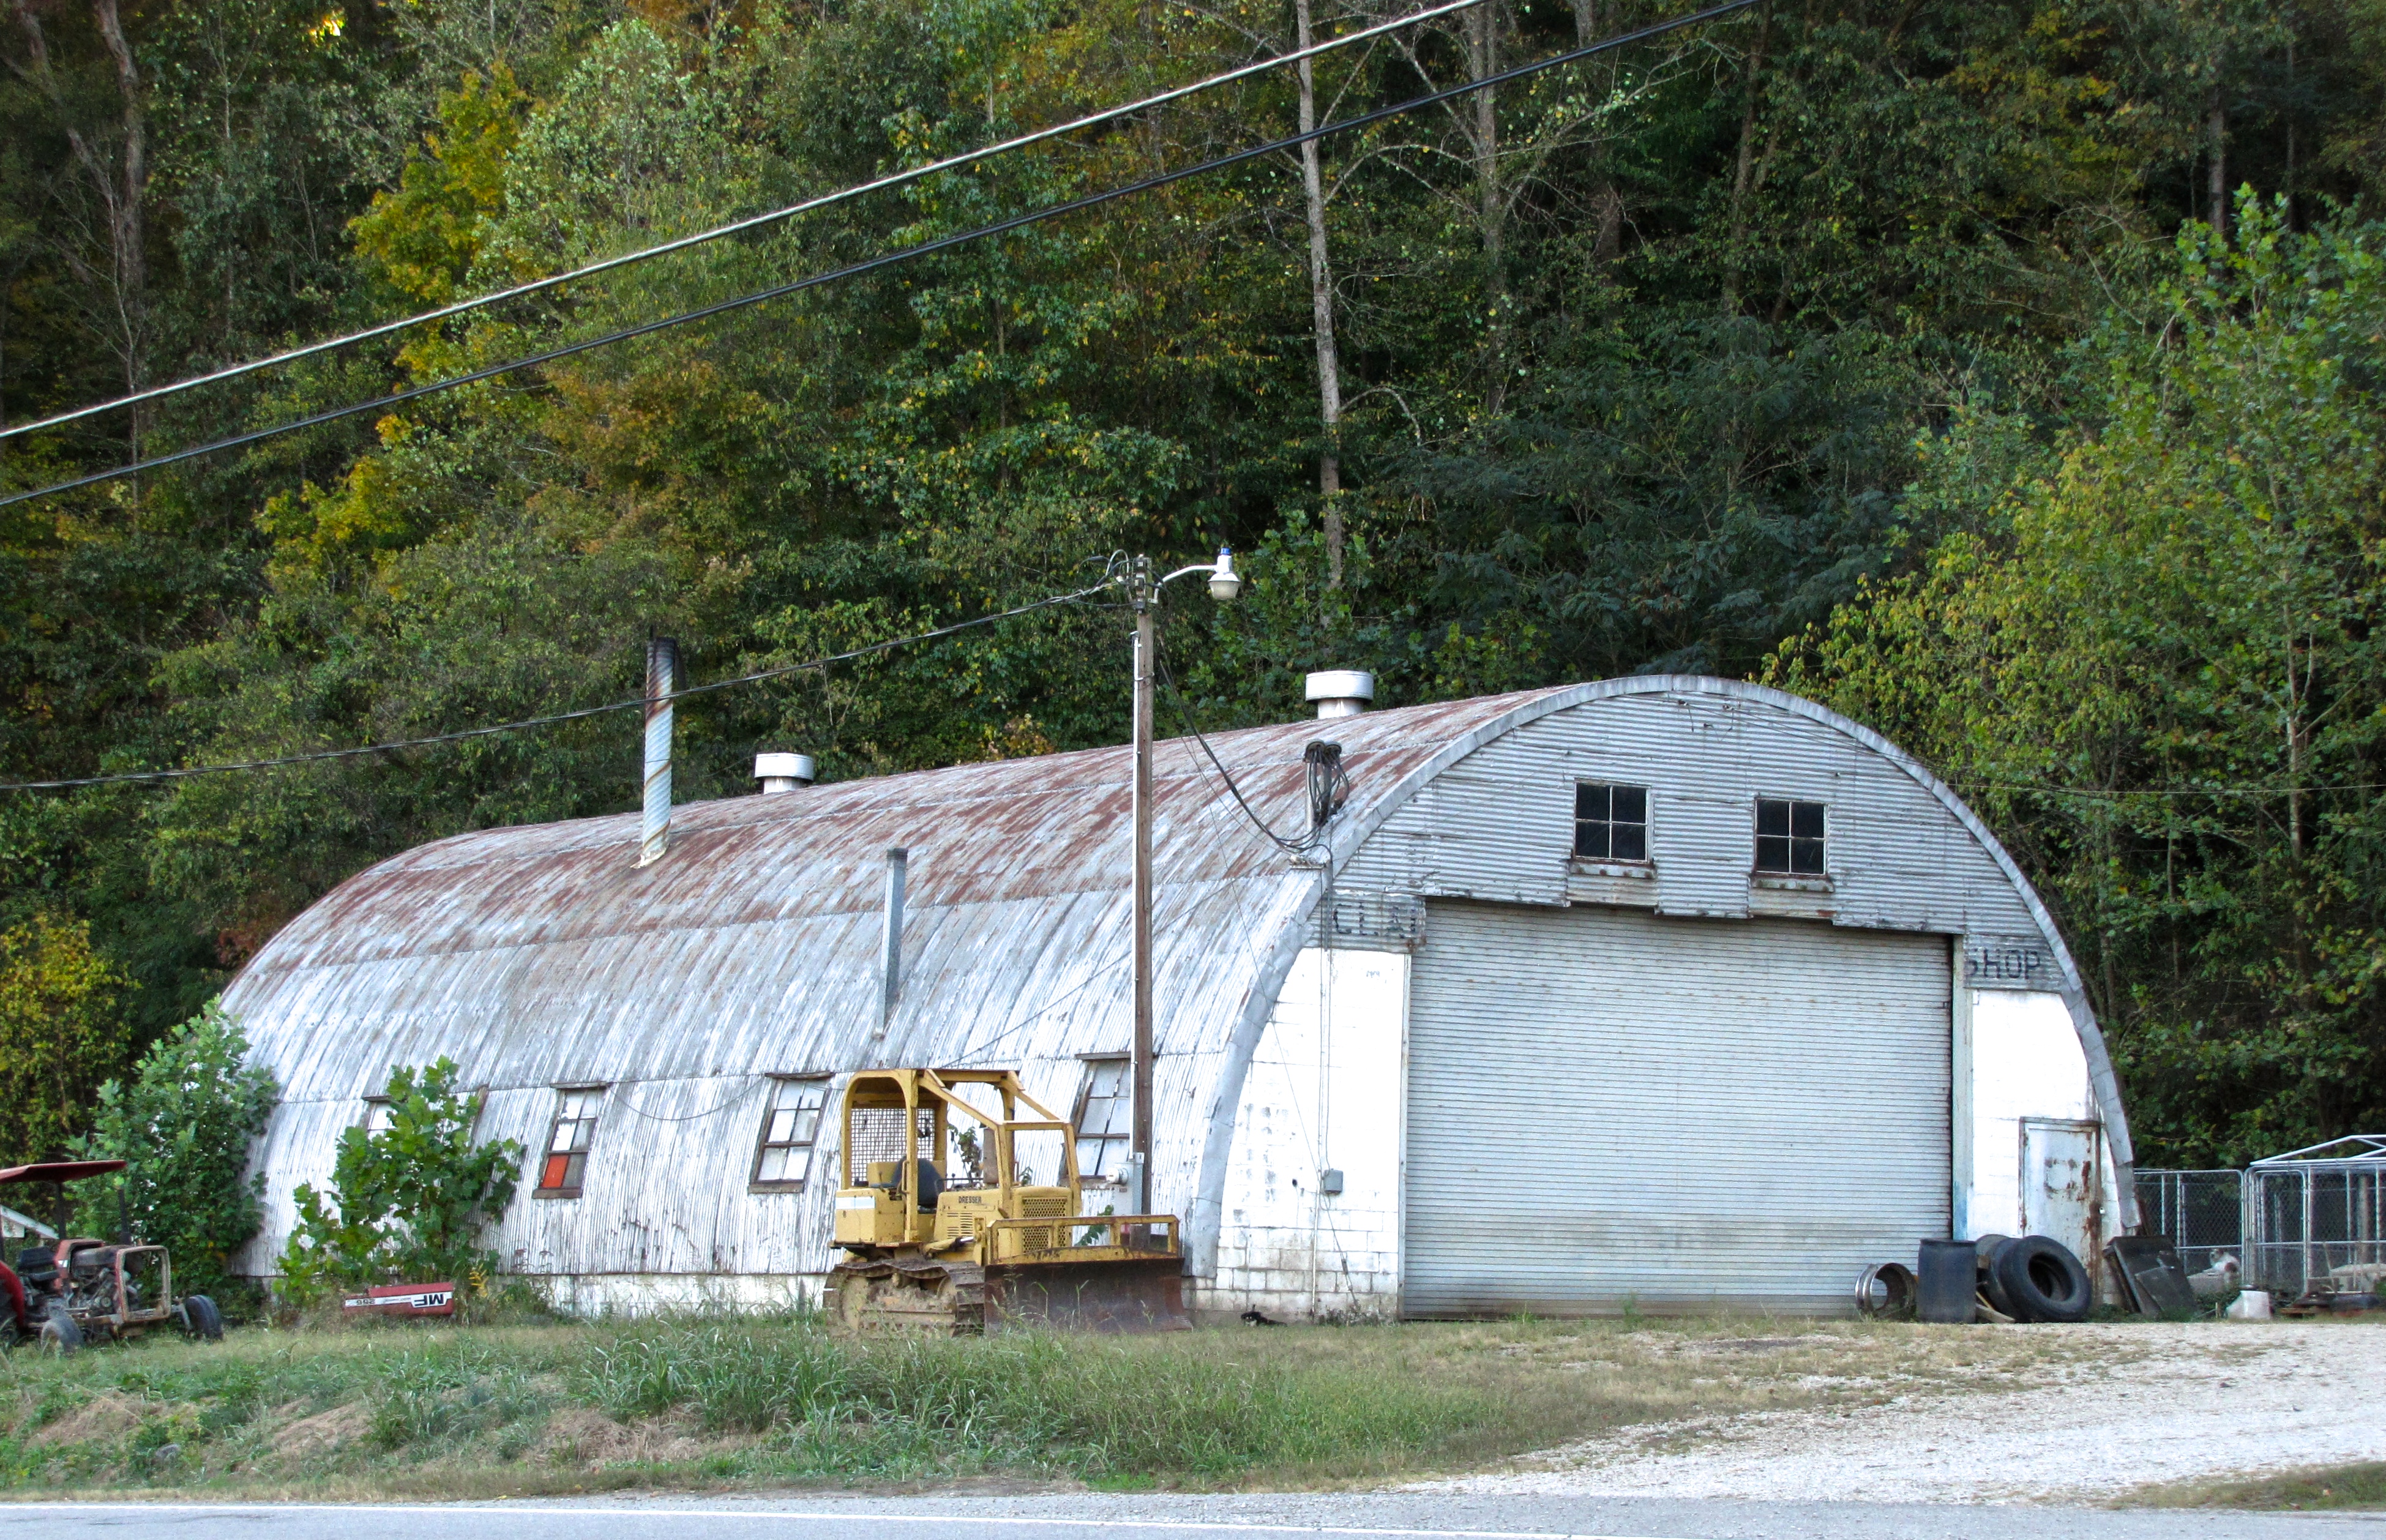 quonset hut in Terms Of Service, DE